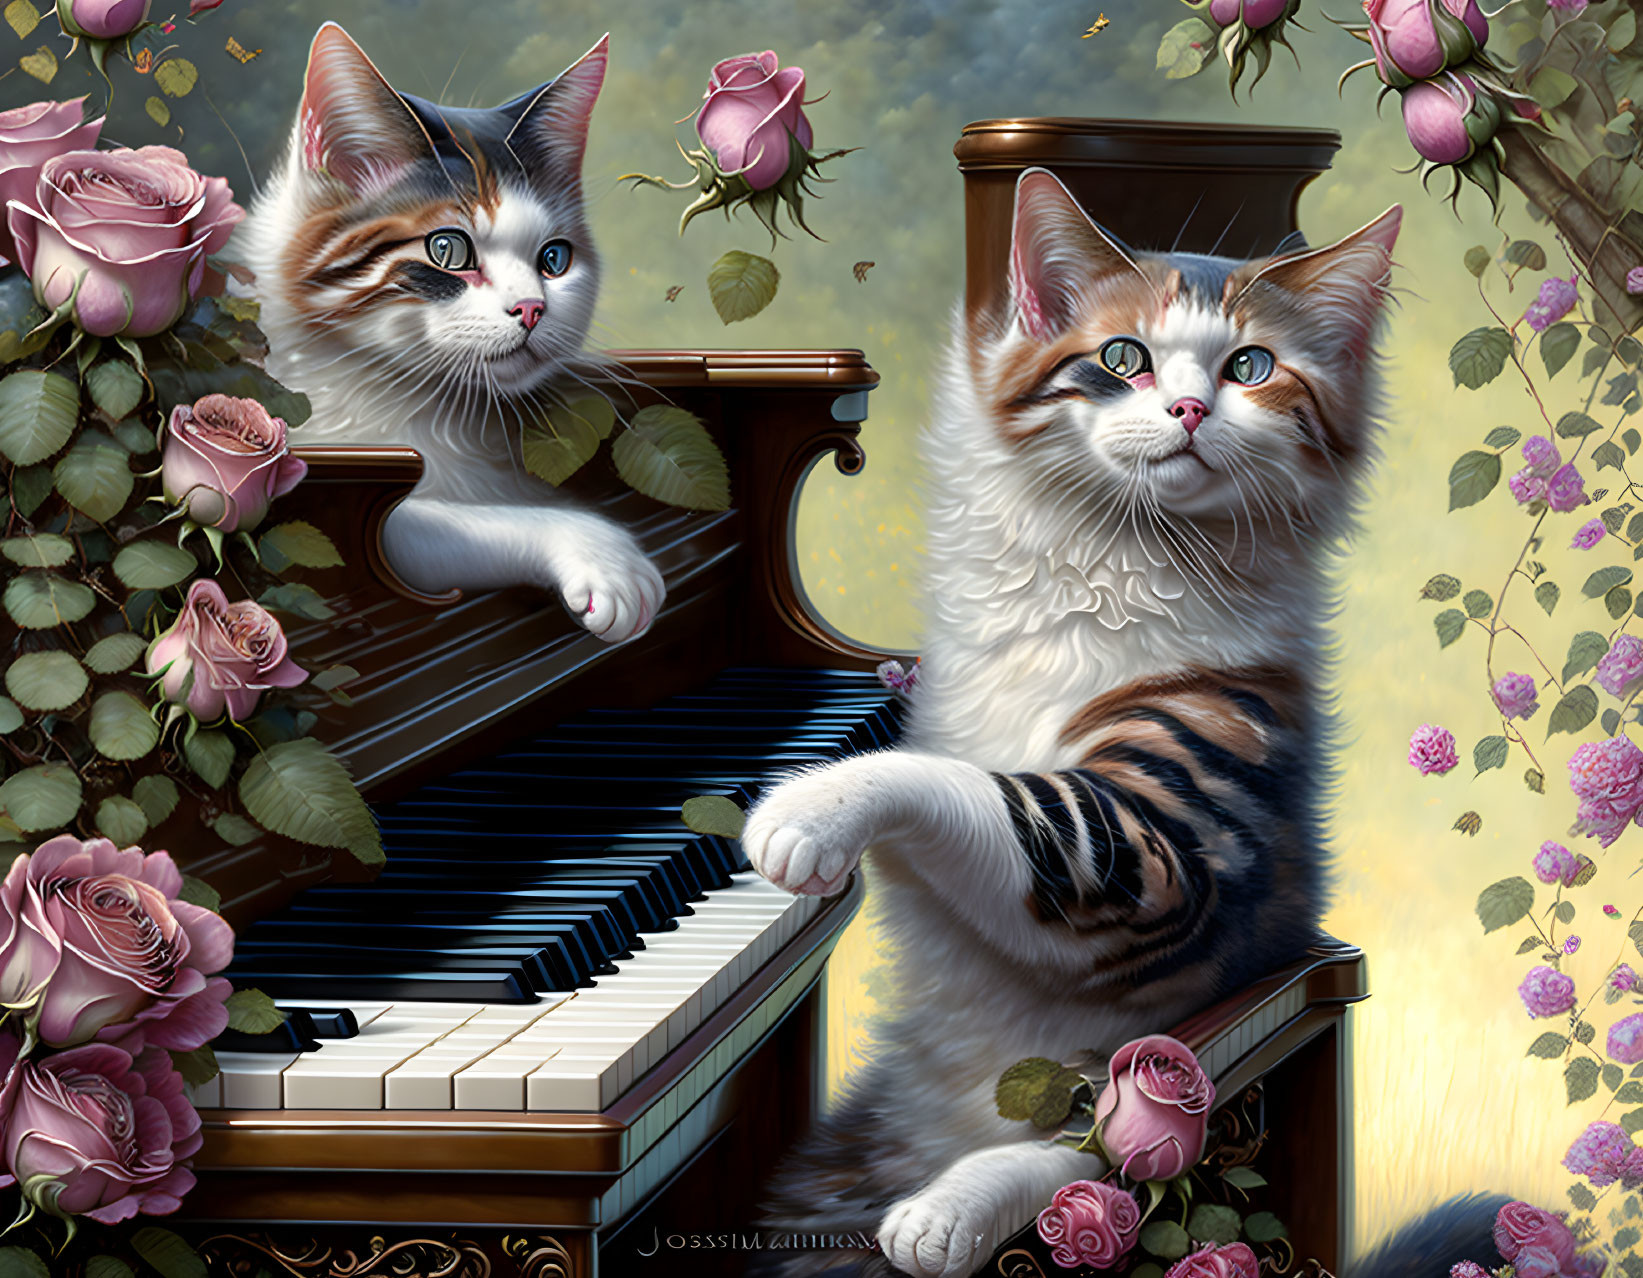 Roses cat playing a piano. extreme details, full f